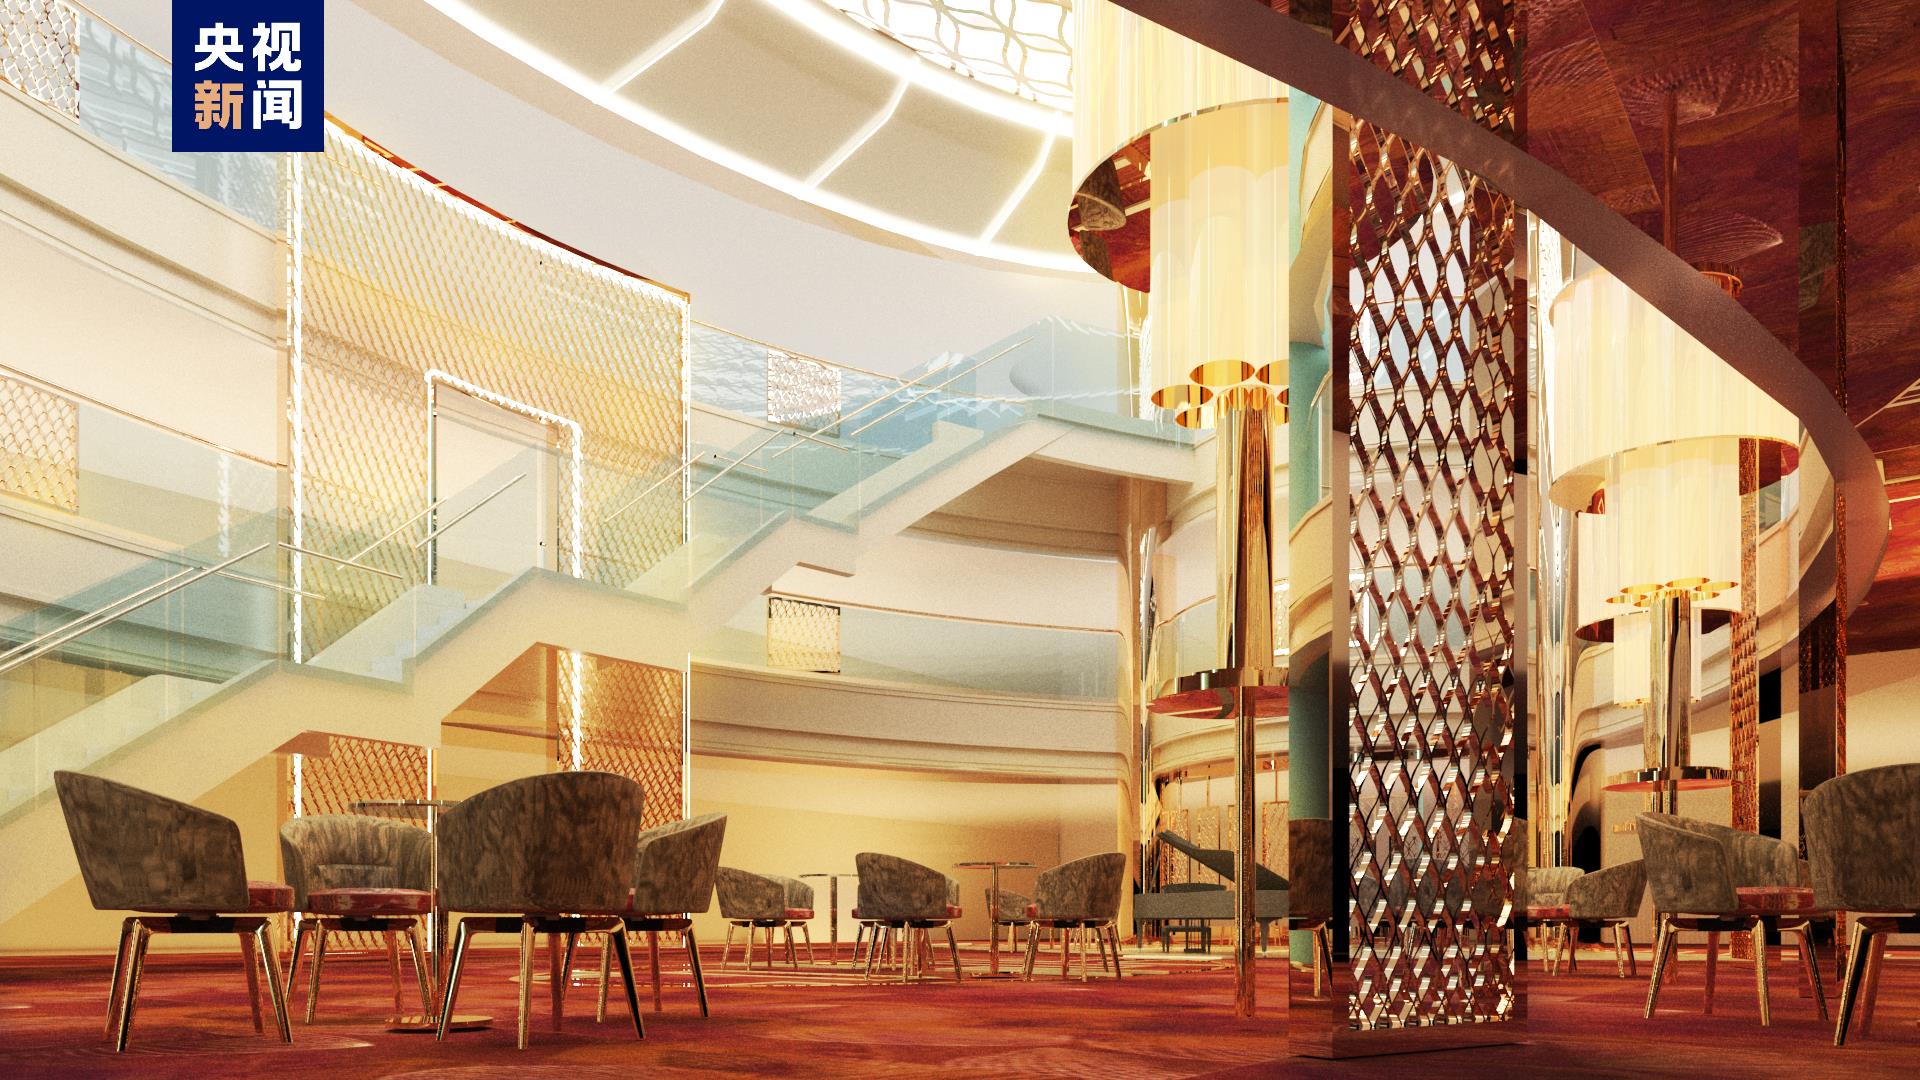 Rendering of the inside of the second domestically built large cruise ship. /CMG